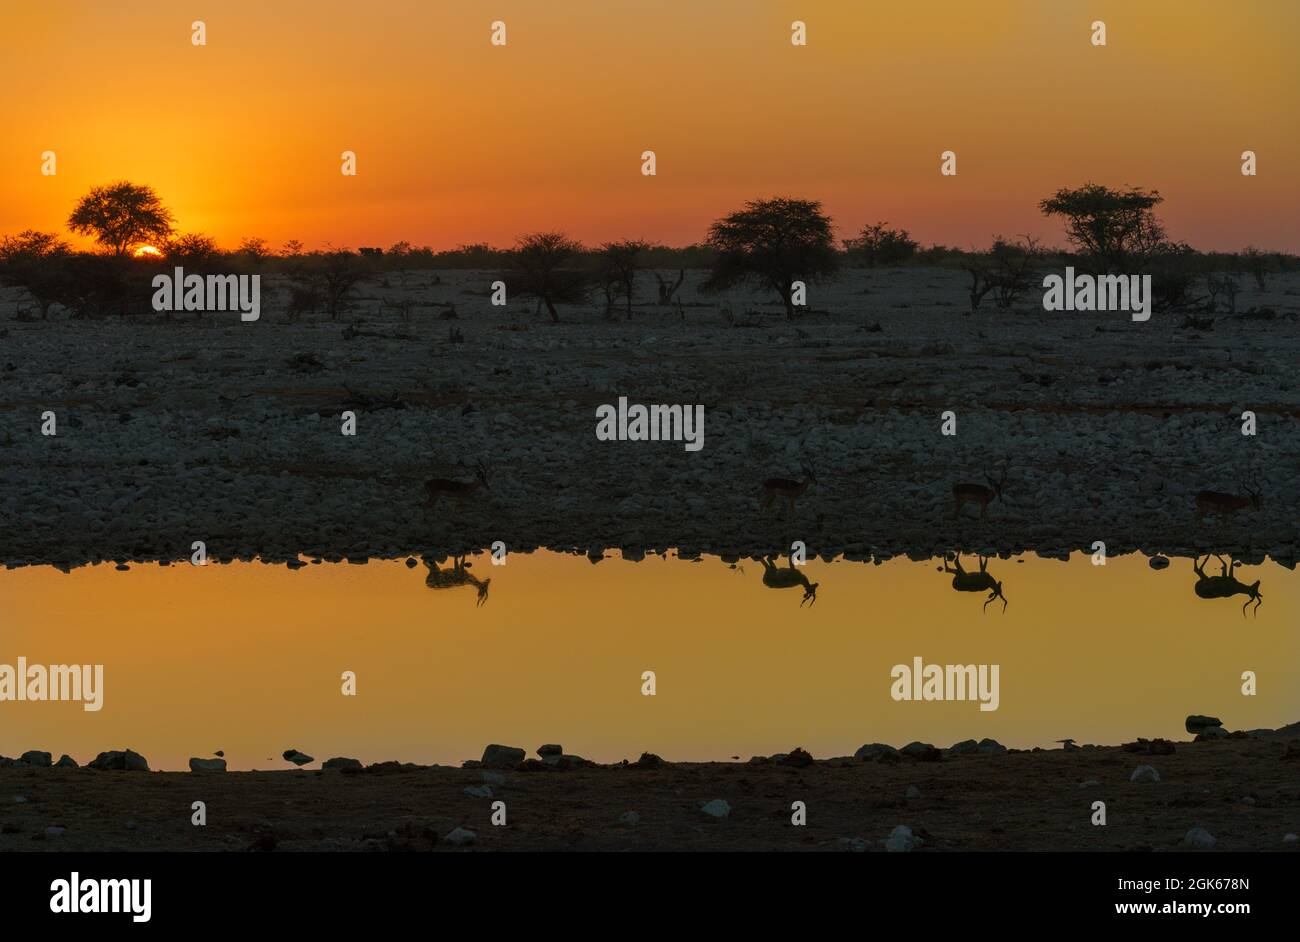 Impalas in silhouette skirting a waterhole at sunset in Northern Namibia Africa Stock Photo